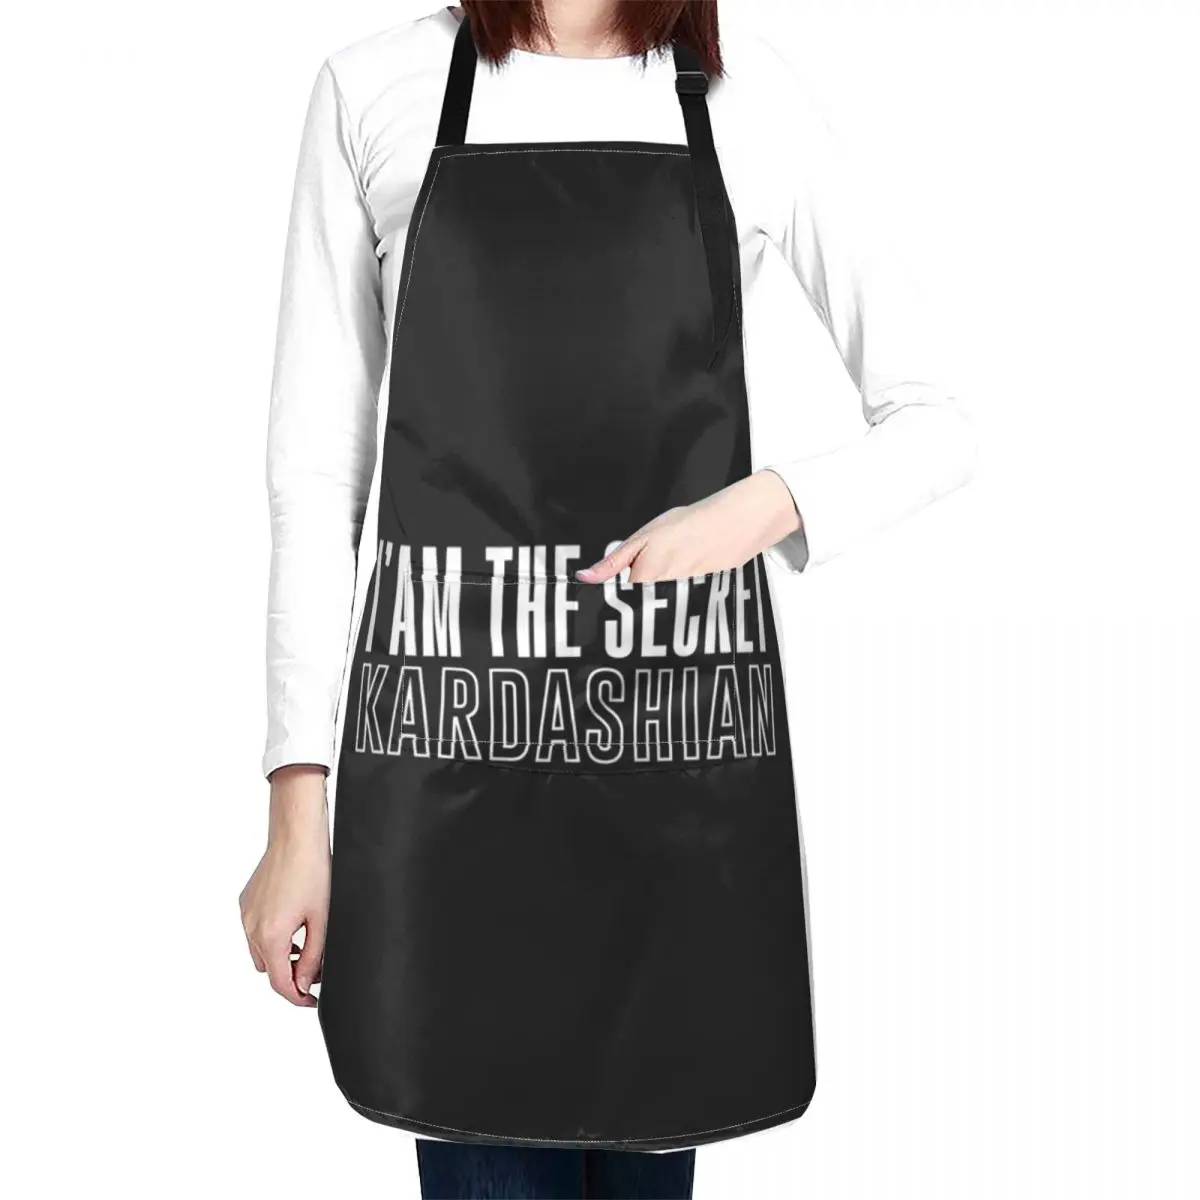 I'am The Secret Kardashian Apron Home and kitchen products House Things For Home And Kitchen beauty master apron